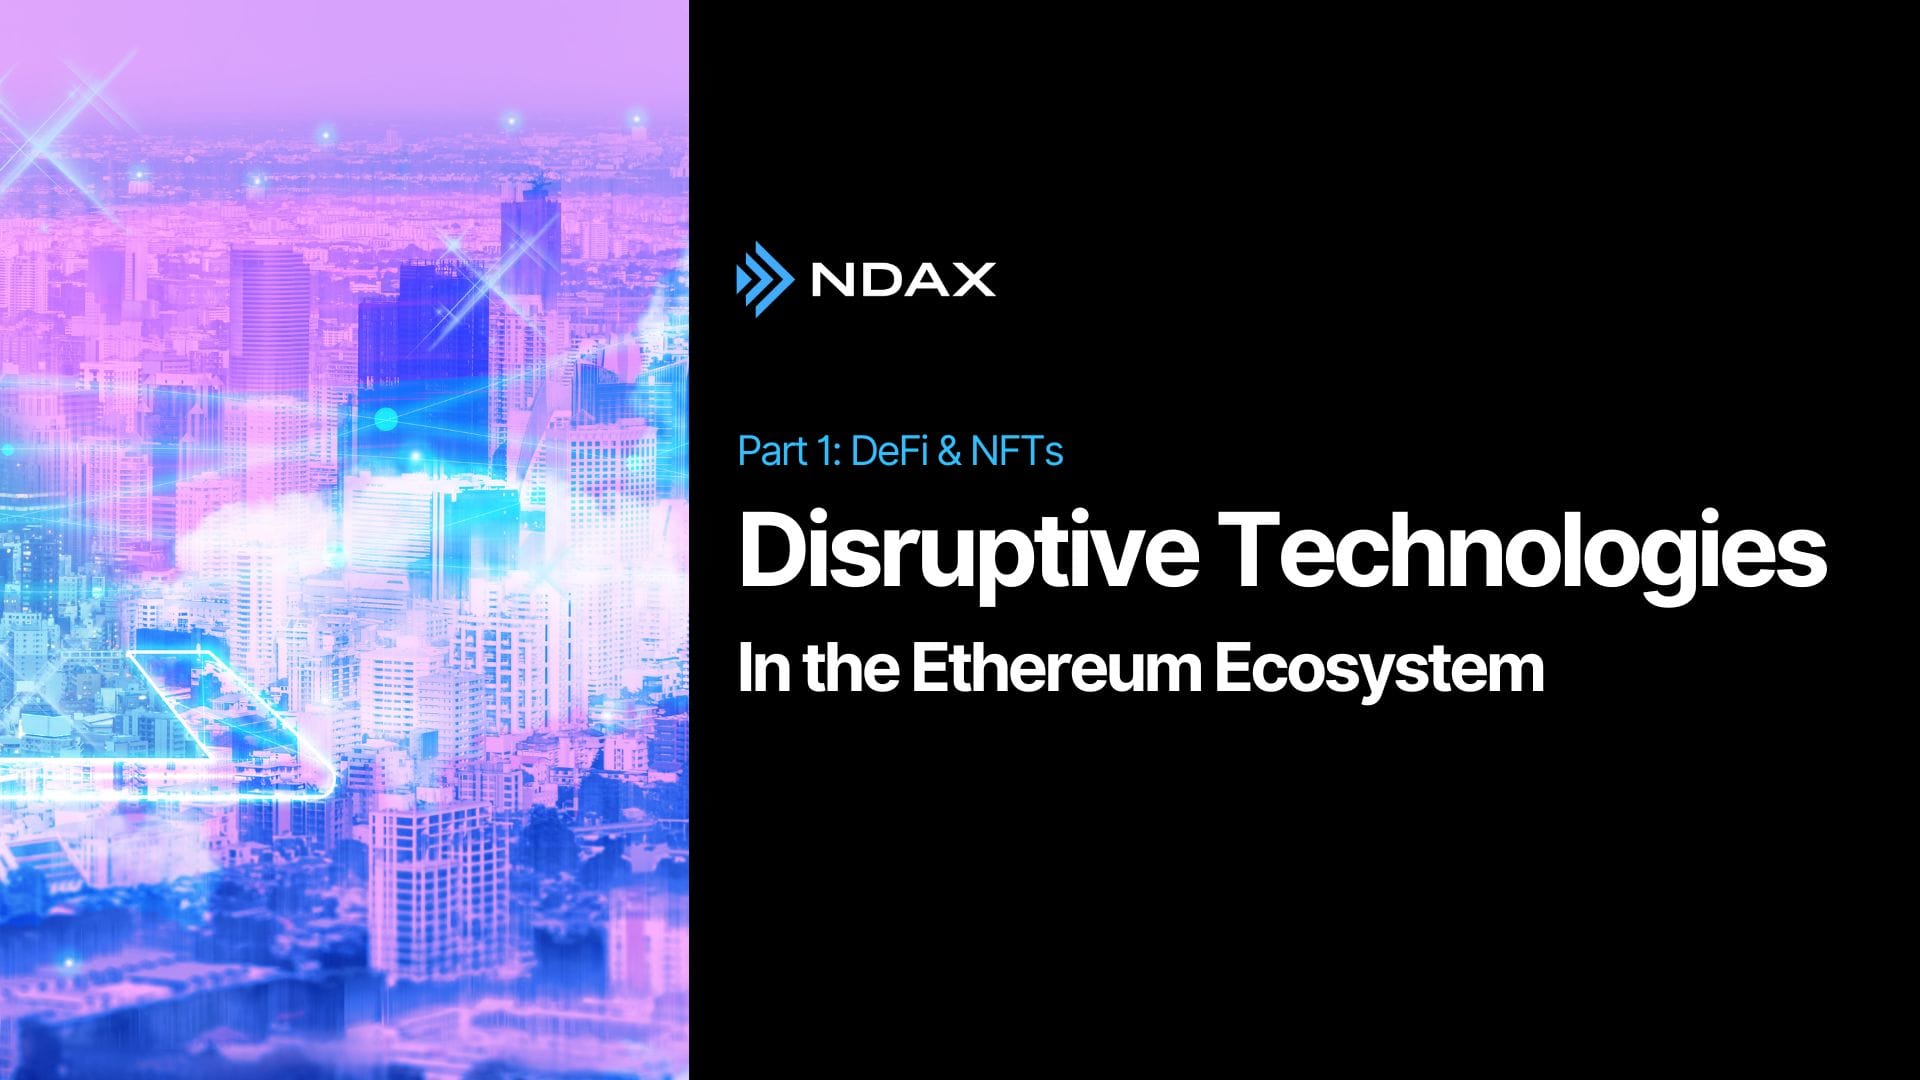 The Most Disruptive Technologies in the Ethereum Ecosystem - Part I